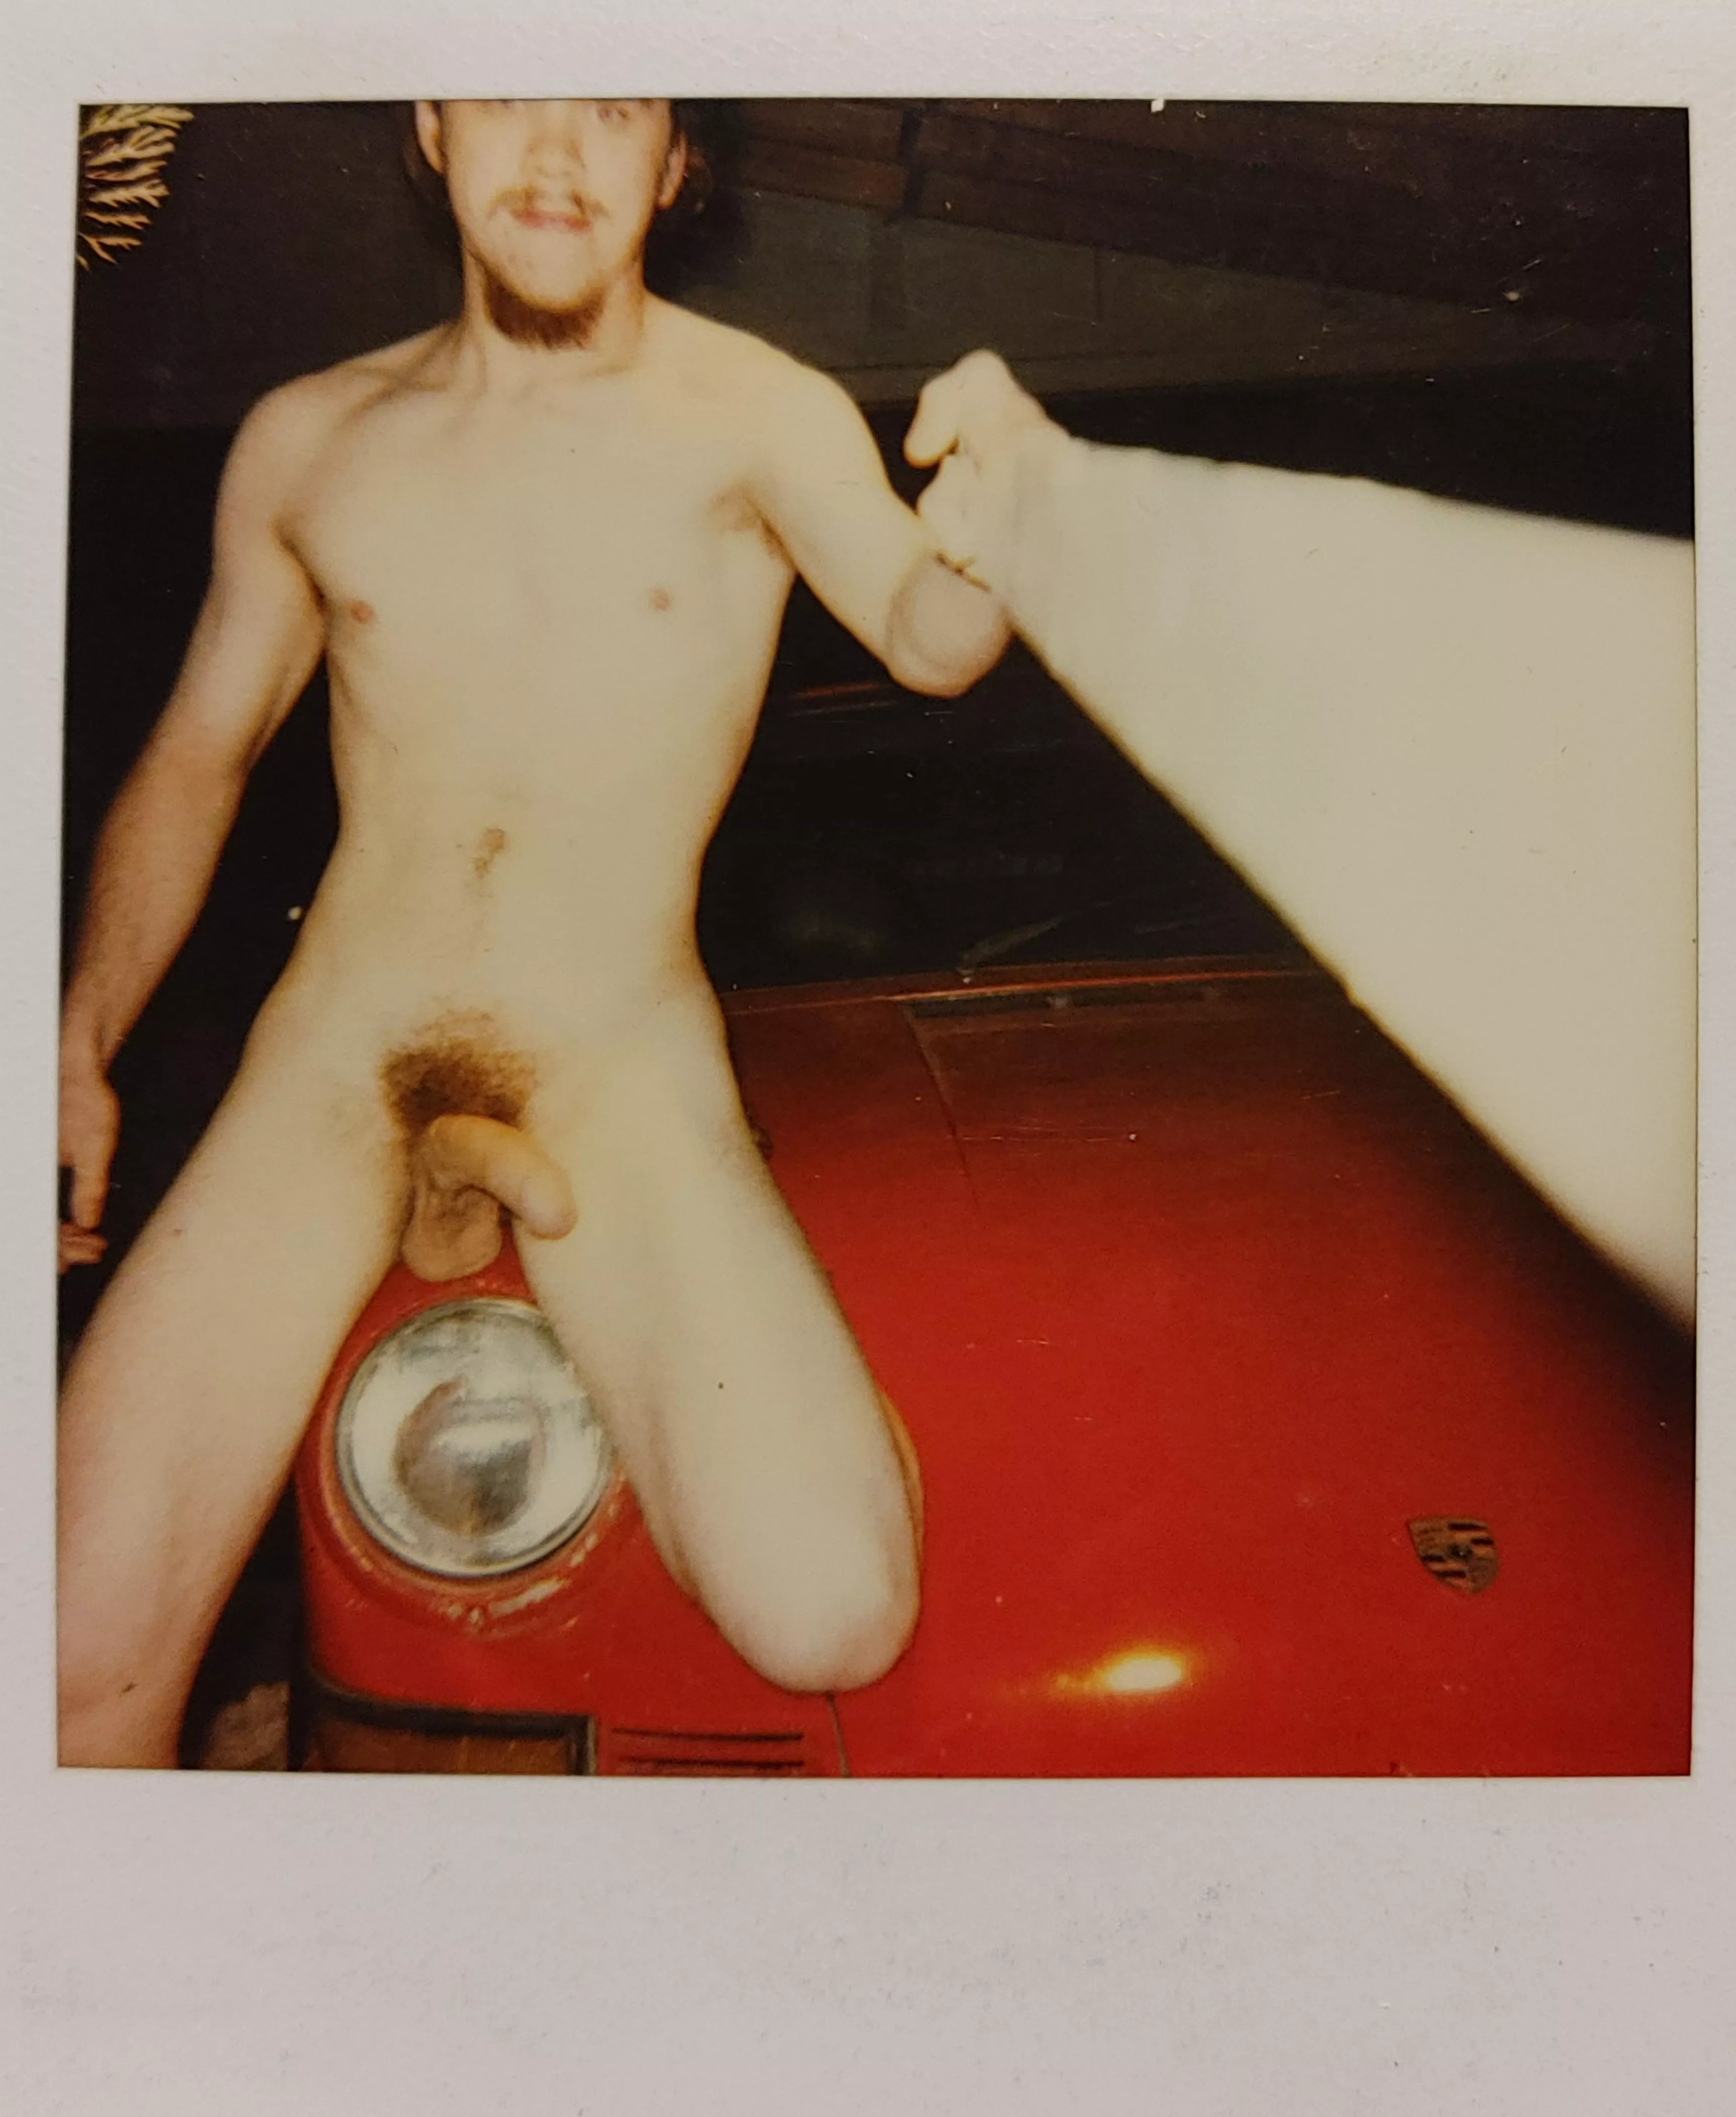 Polaroid selfie, I was about 20 here image picture